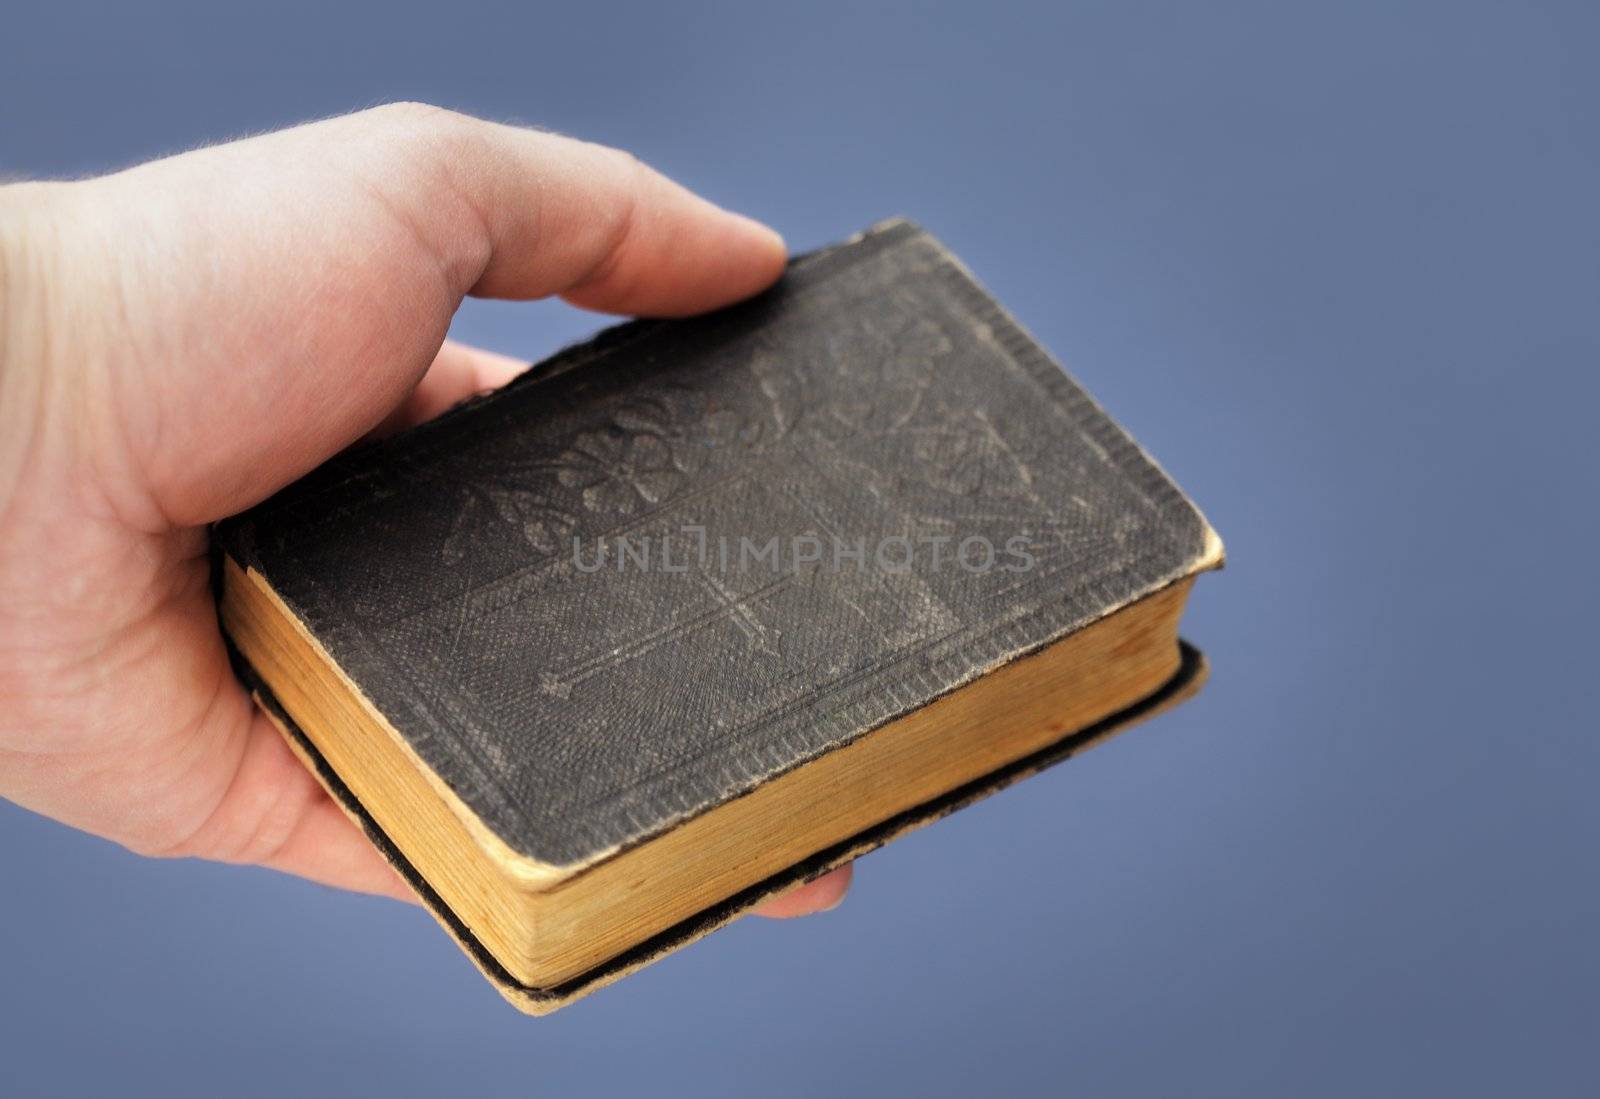 Bible by Stocksnapper